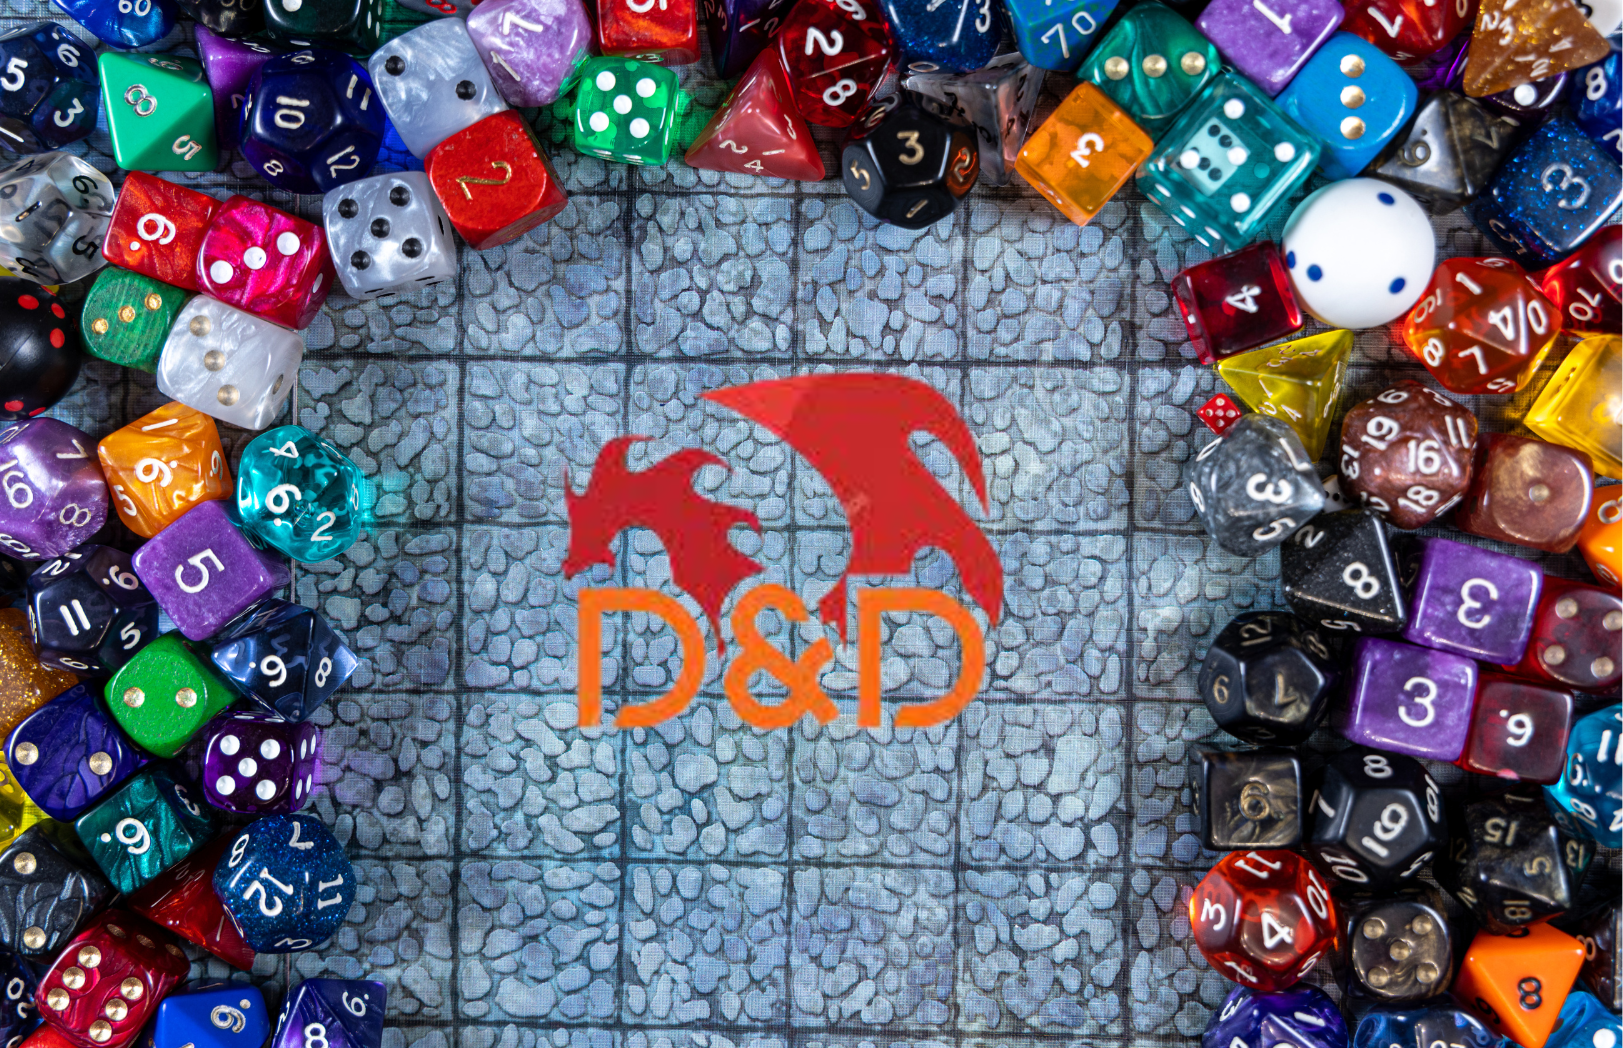 "D&D" with red dragon logo surrounded by dice.